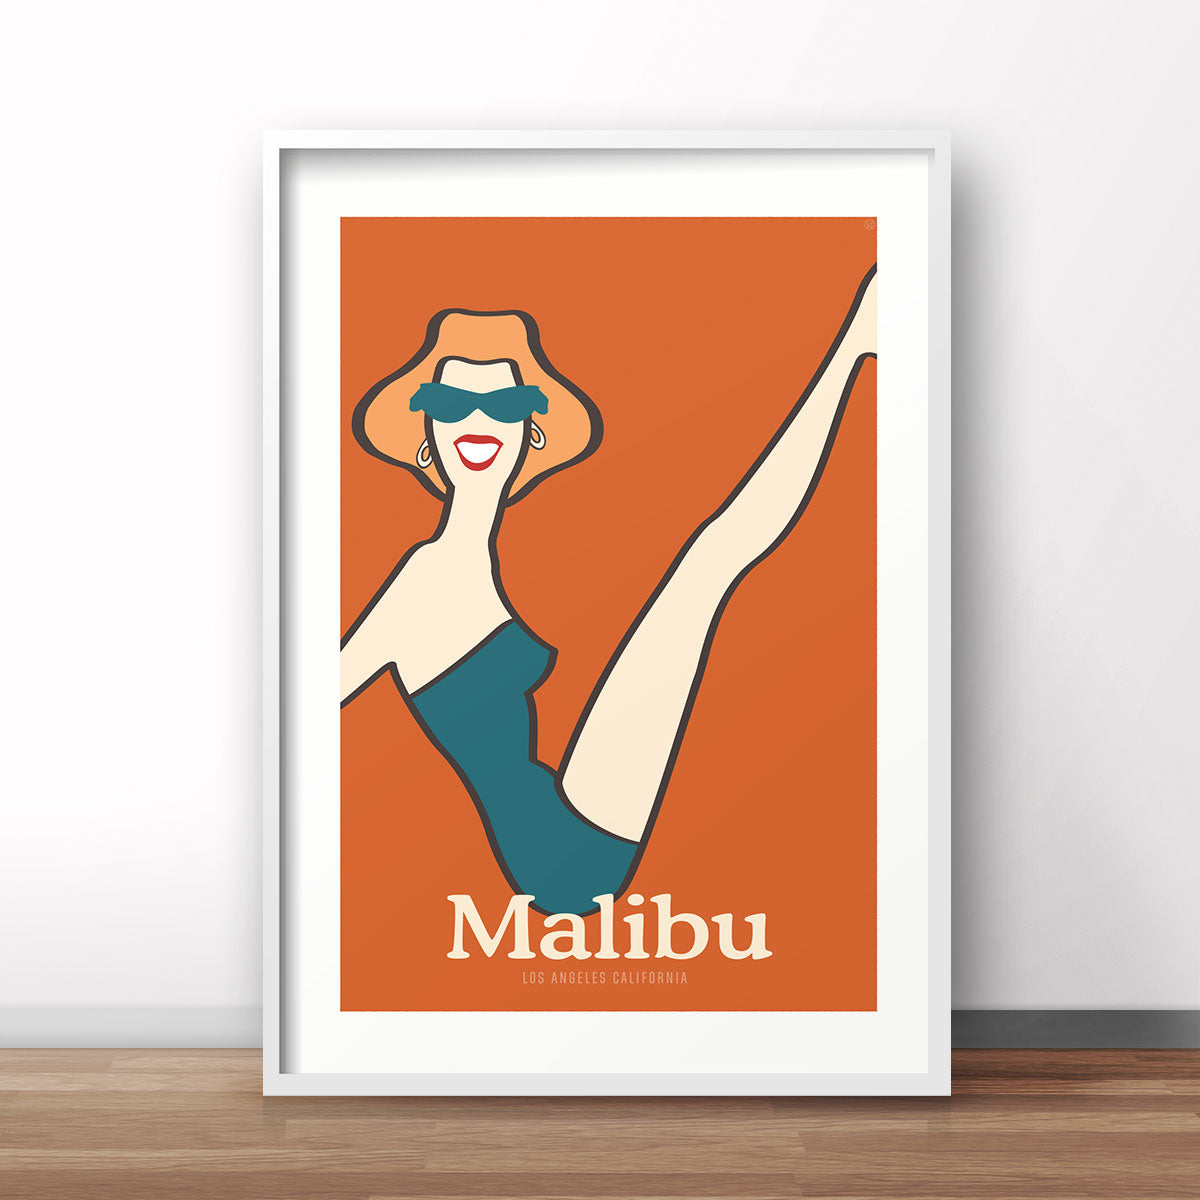 Malibu retro vintage poster print from Places We Luv